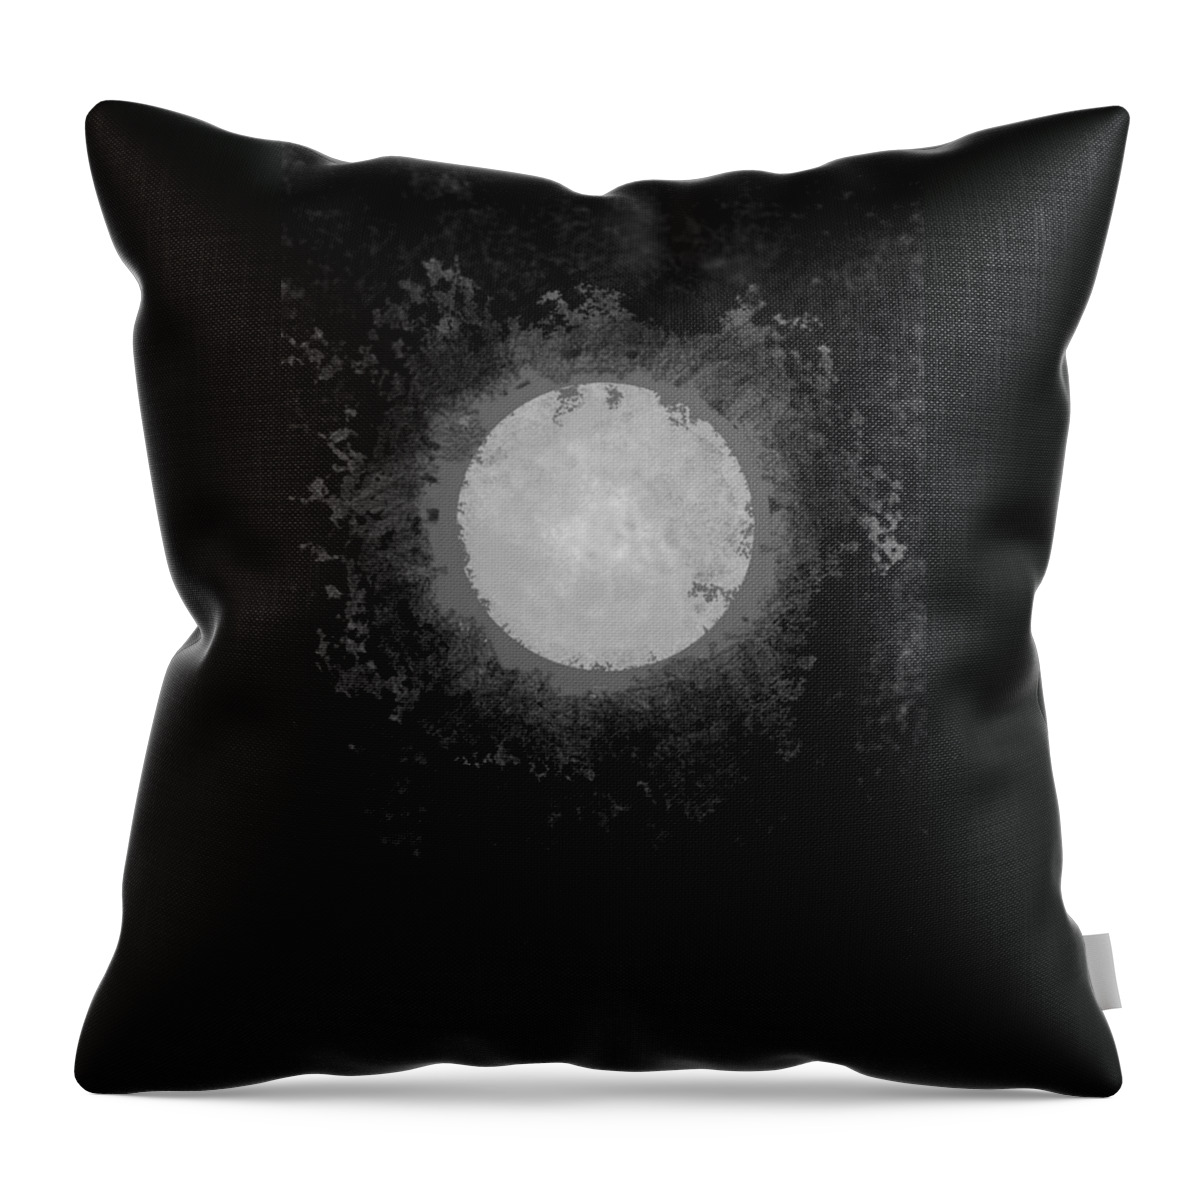 Digital Drawing Throw Pillow featuring the digital art Afterward by Carol Jacobs